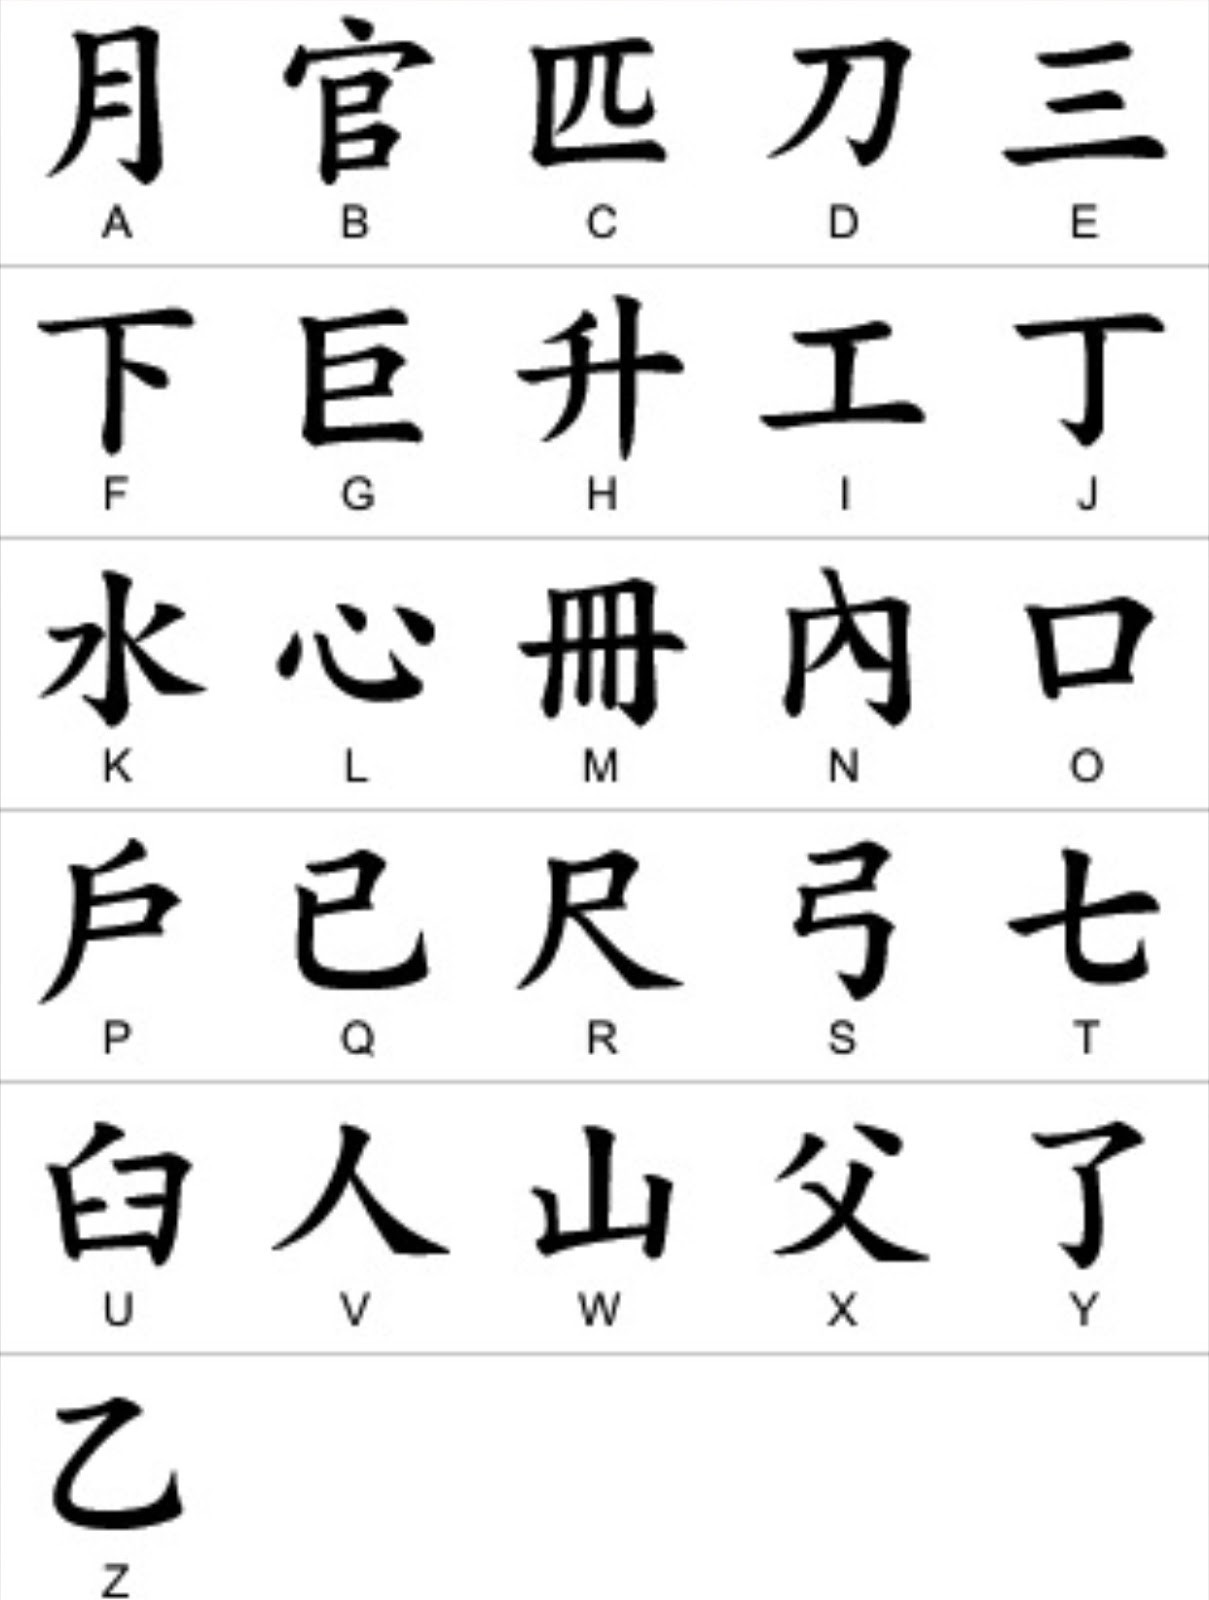 chinese-alphabet-png-1-209-1-600-p-xeles-chinese-alphabet-letters